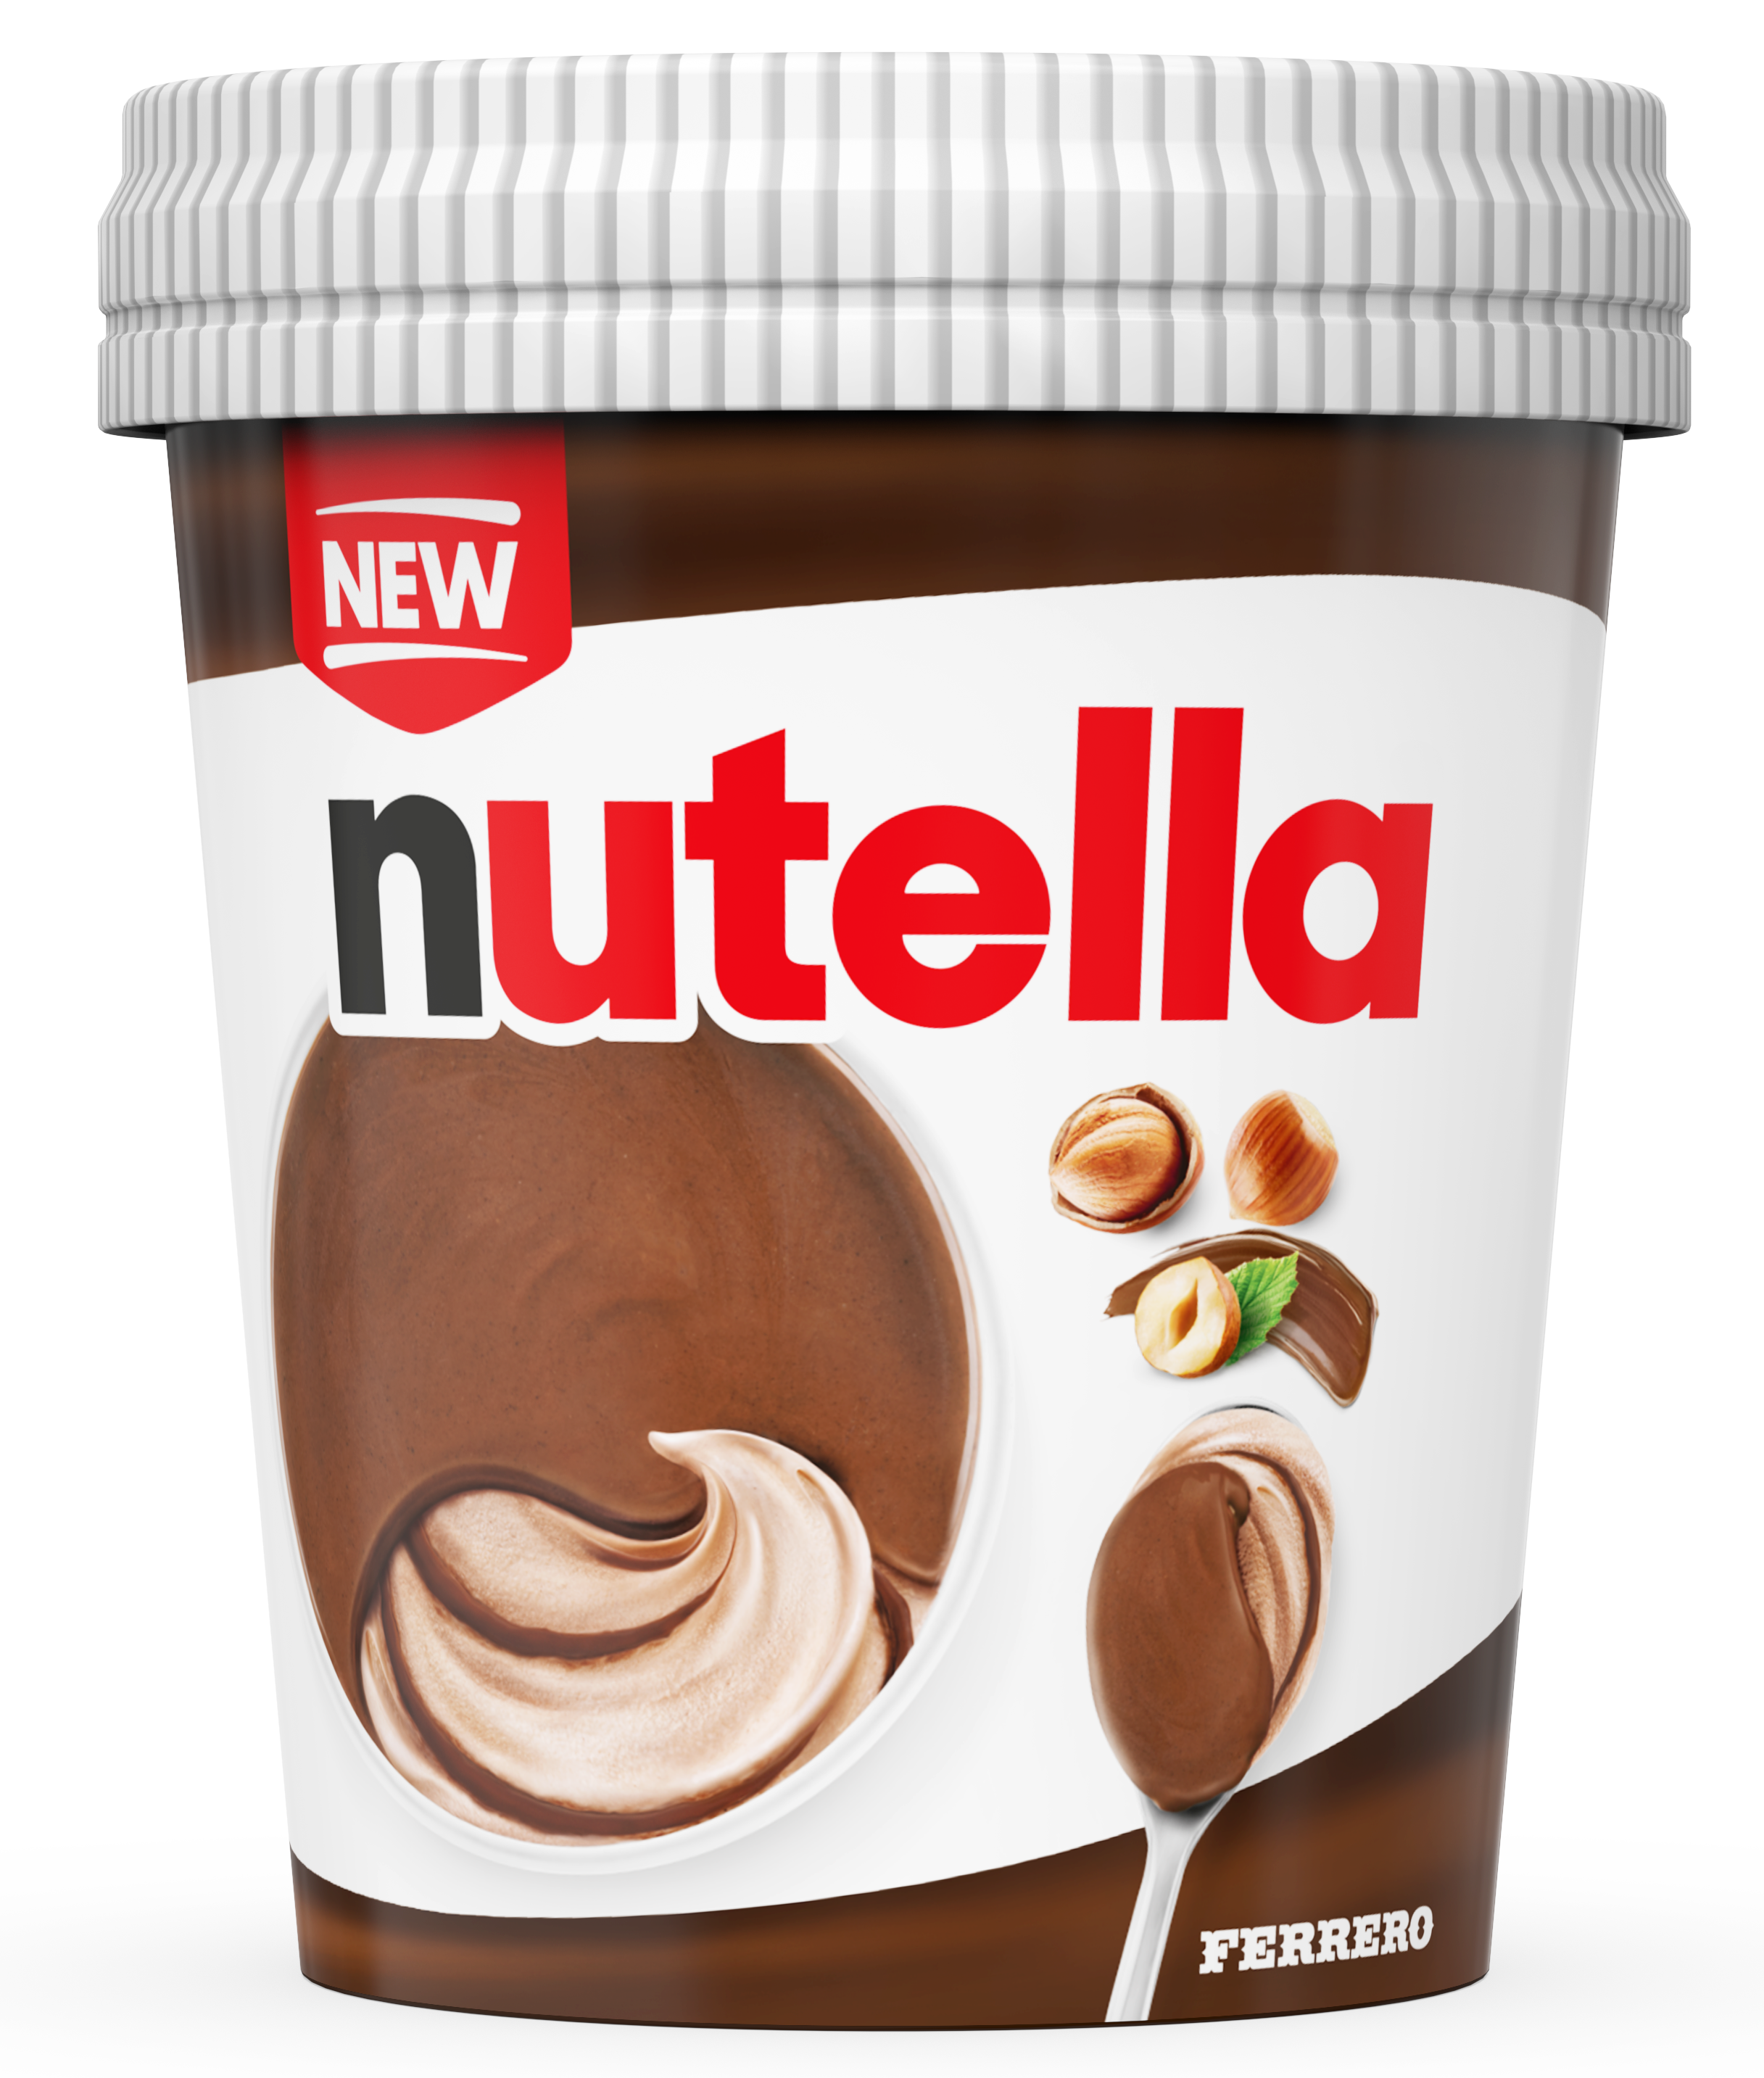 NutellaPot-packbd.png